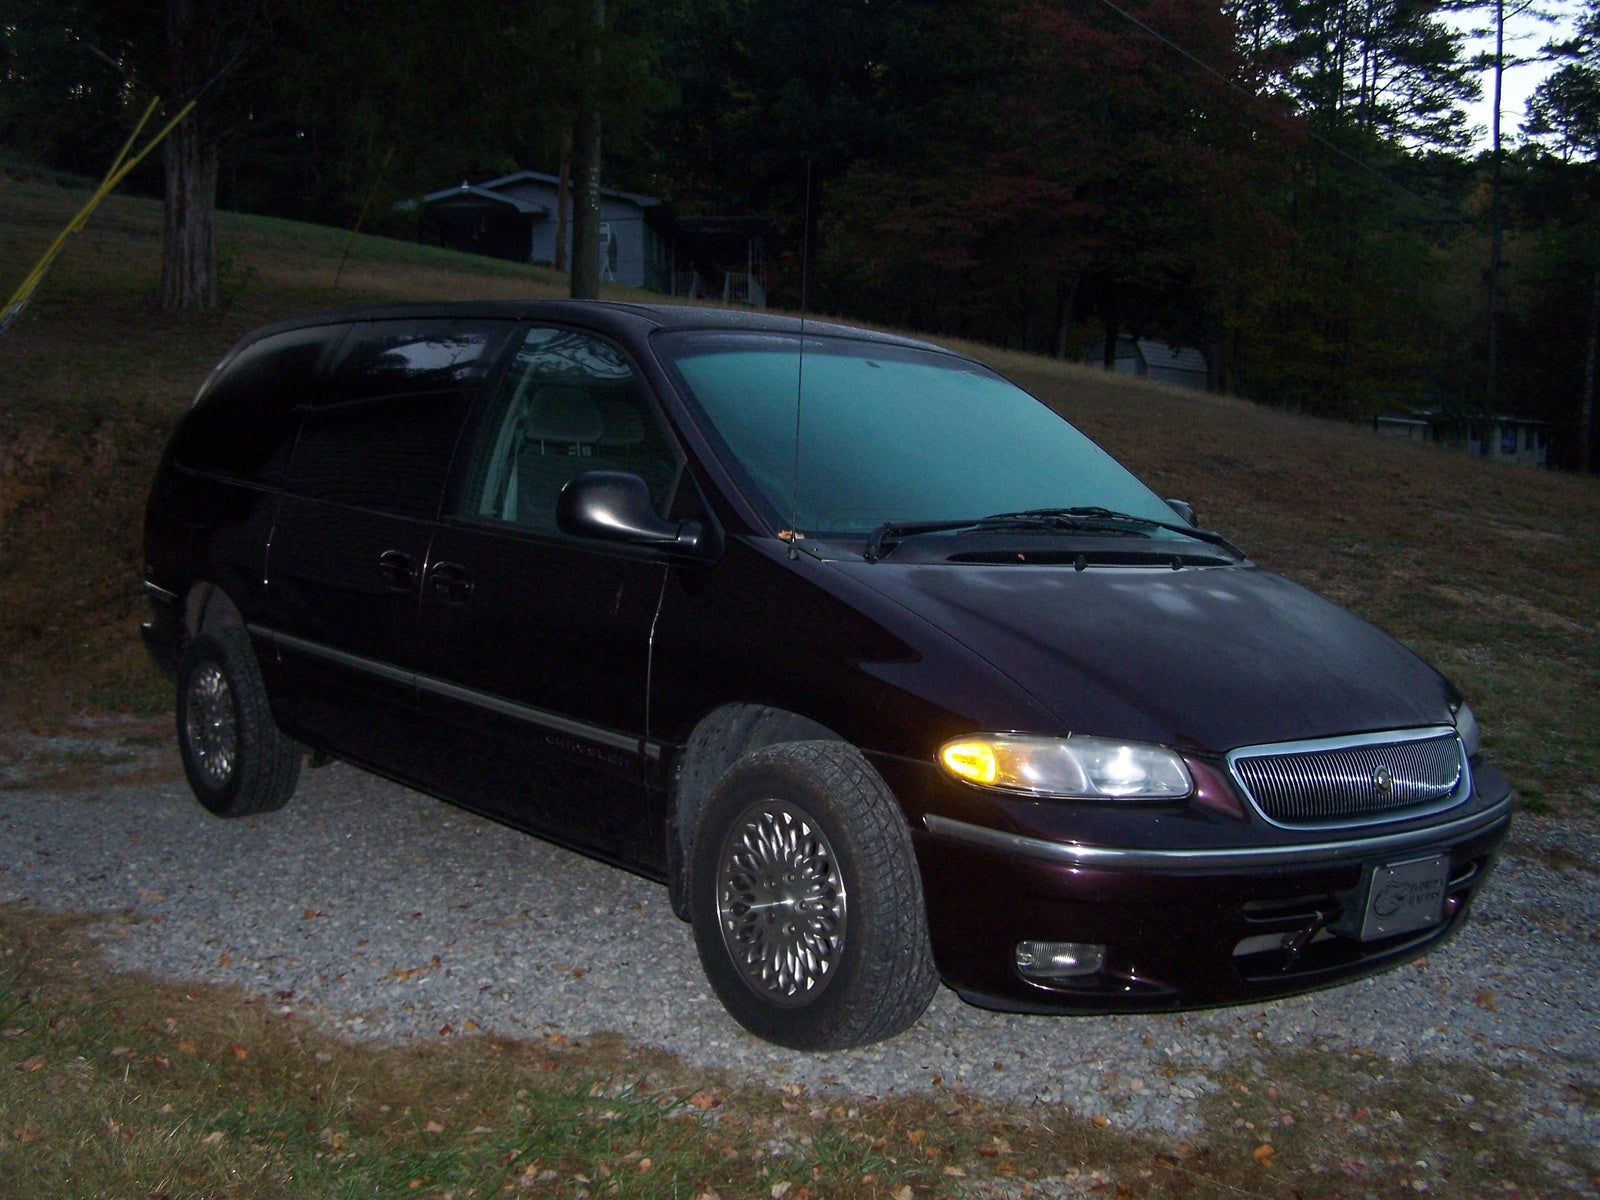 2000 Chrysler town and country owners manual pdf